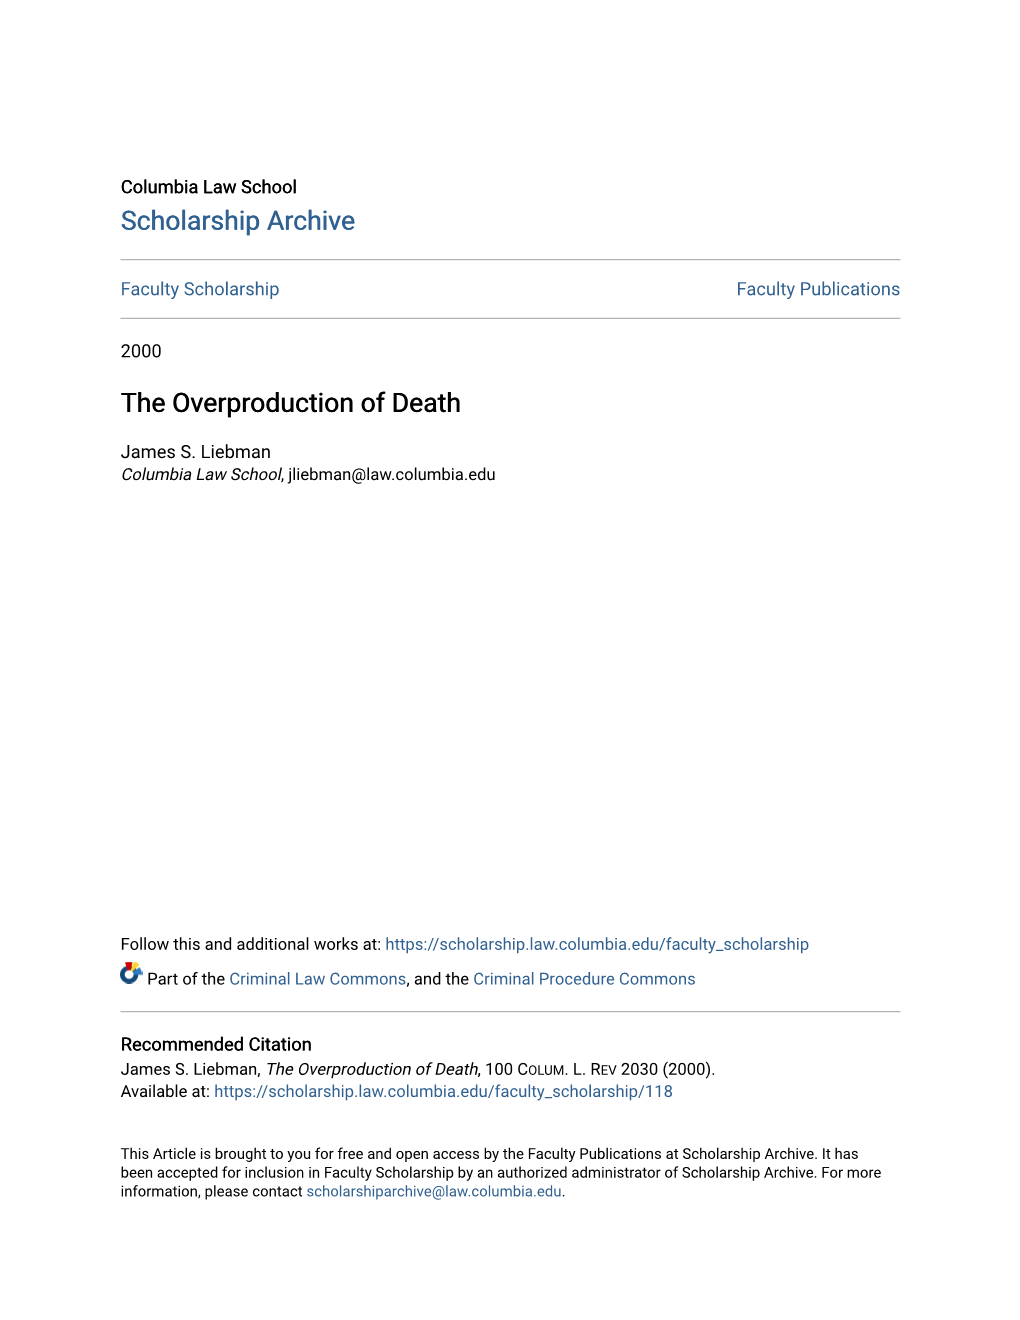 The Overproduction of Death